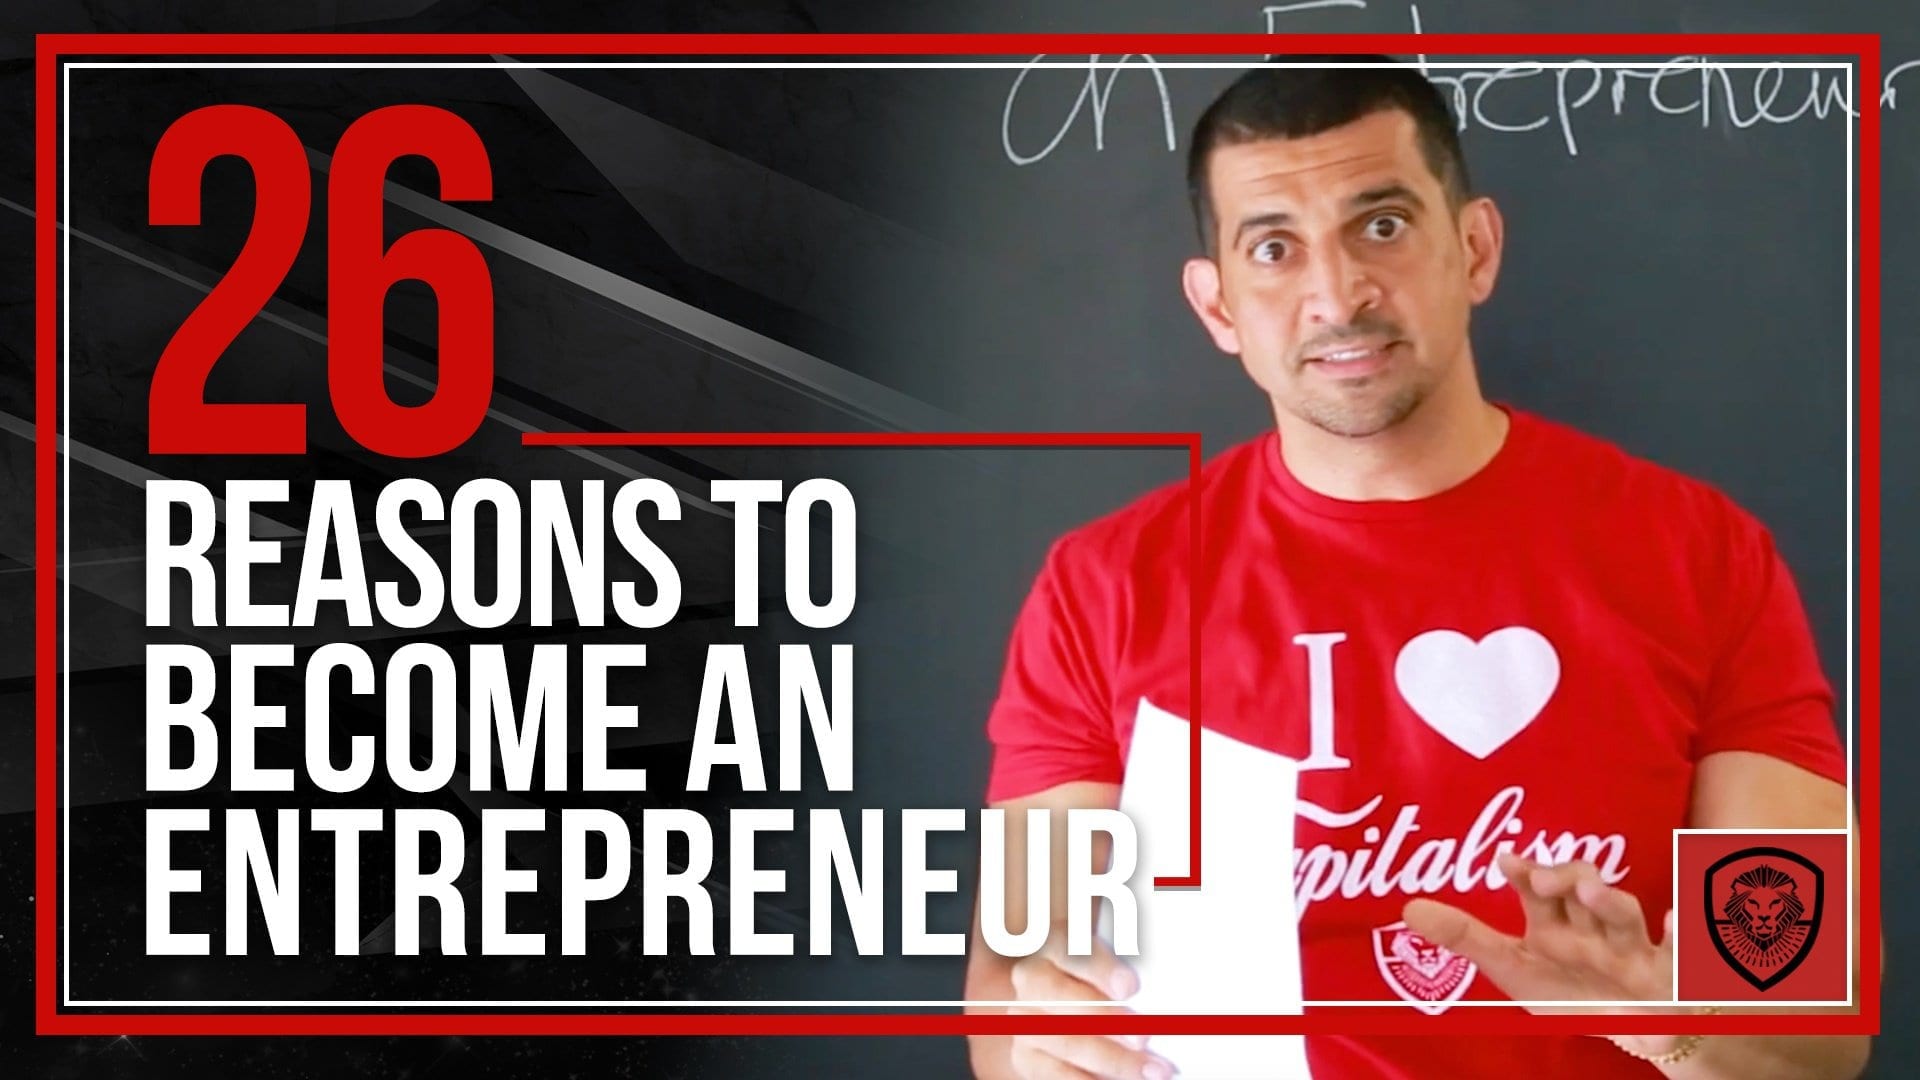 26 Reasons to Become an Entrepreneur